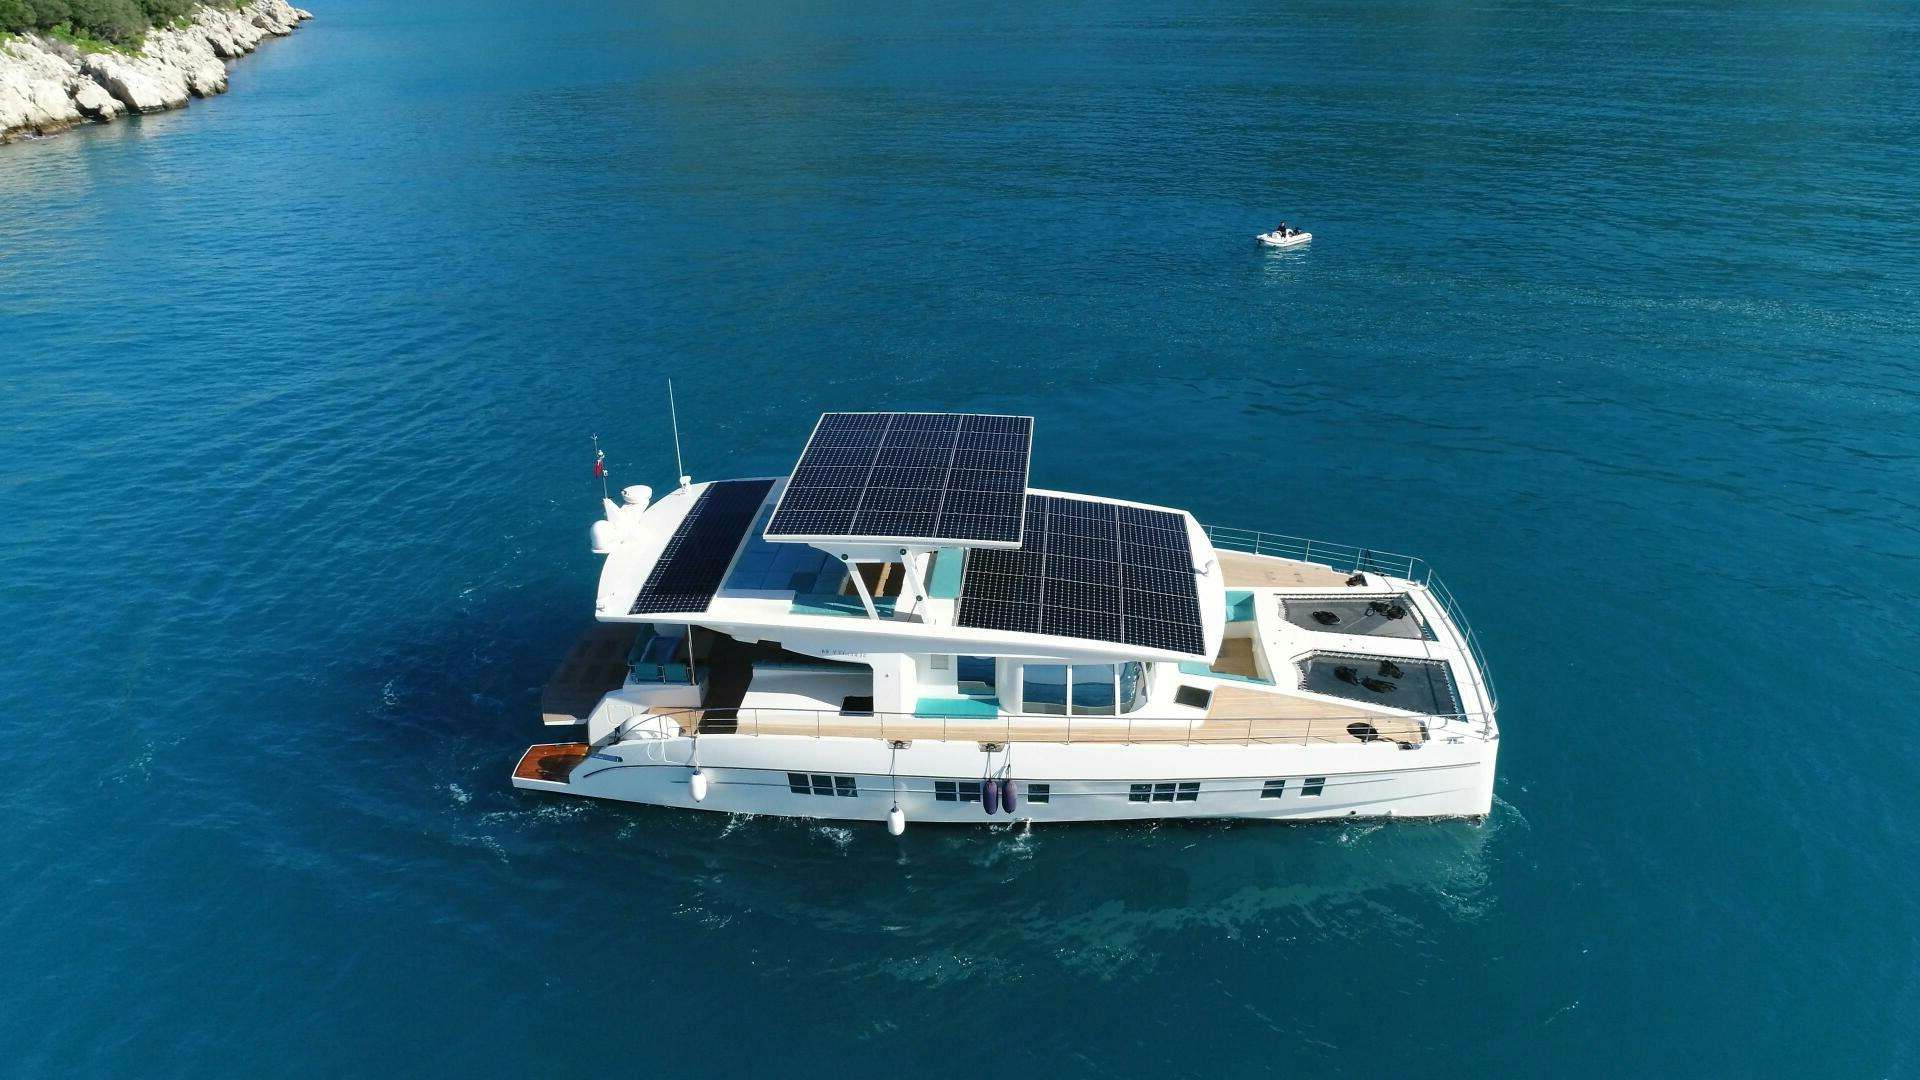 Firefly
Yacht for Sale